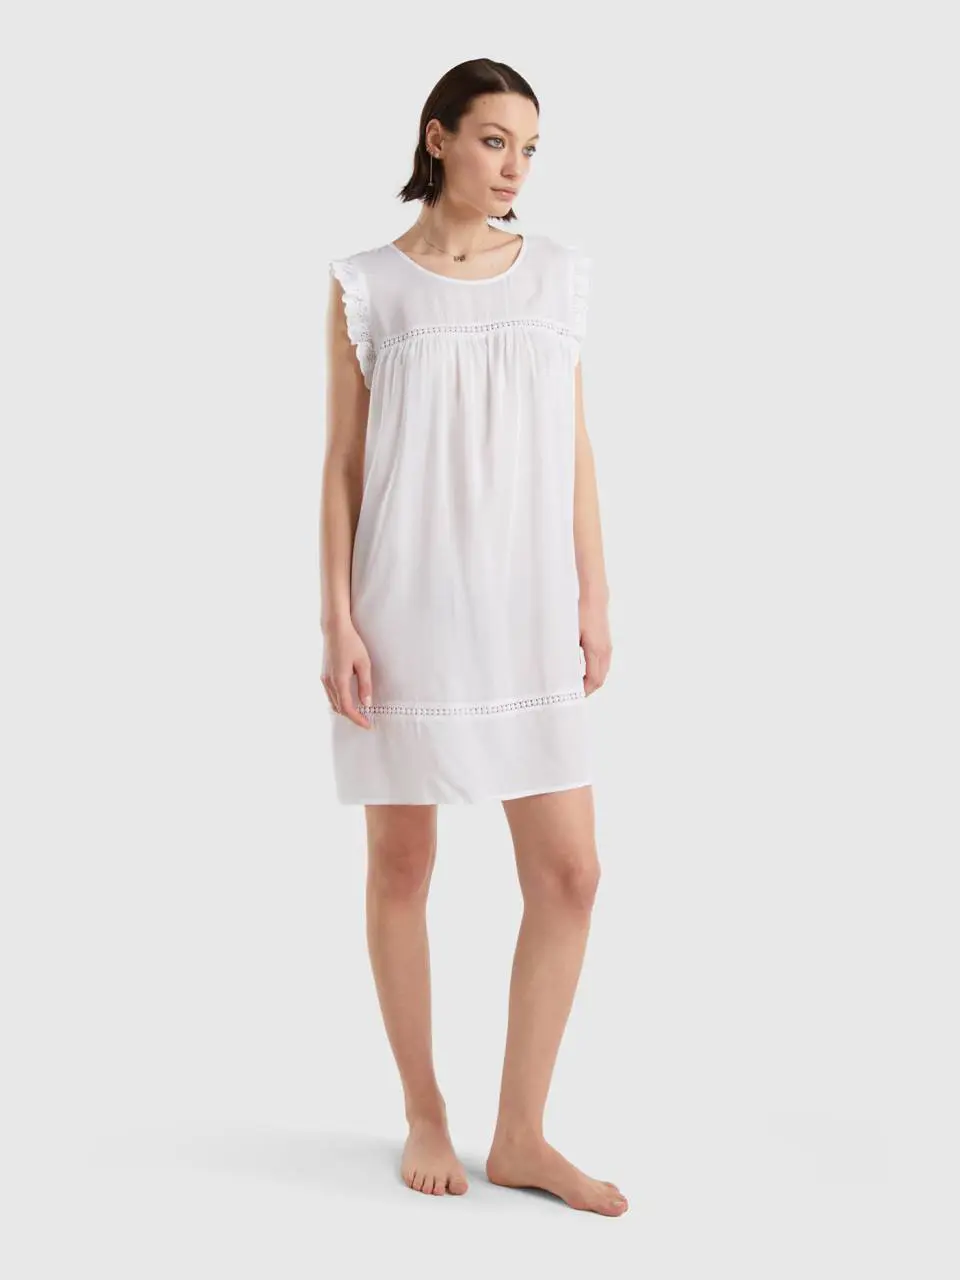 Benetton nightshirt with embroidery. 1